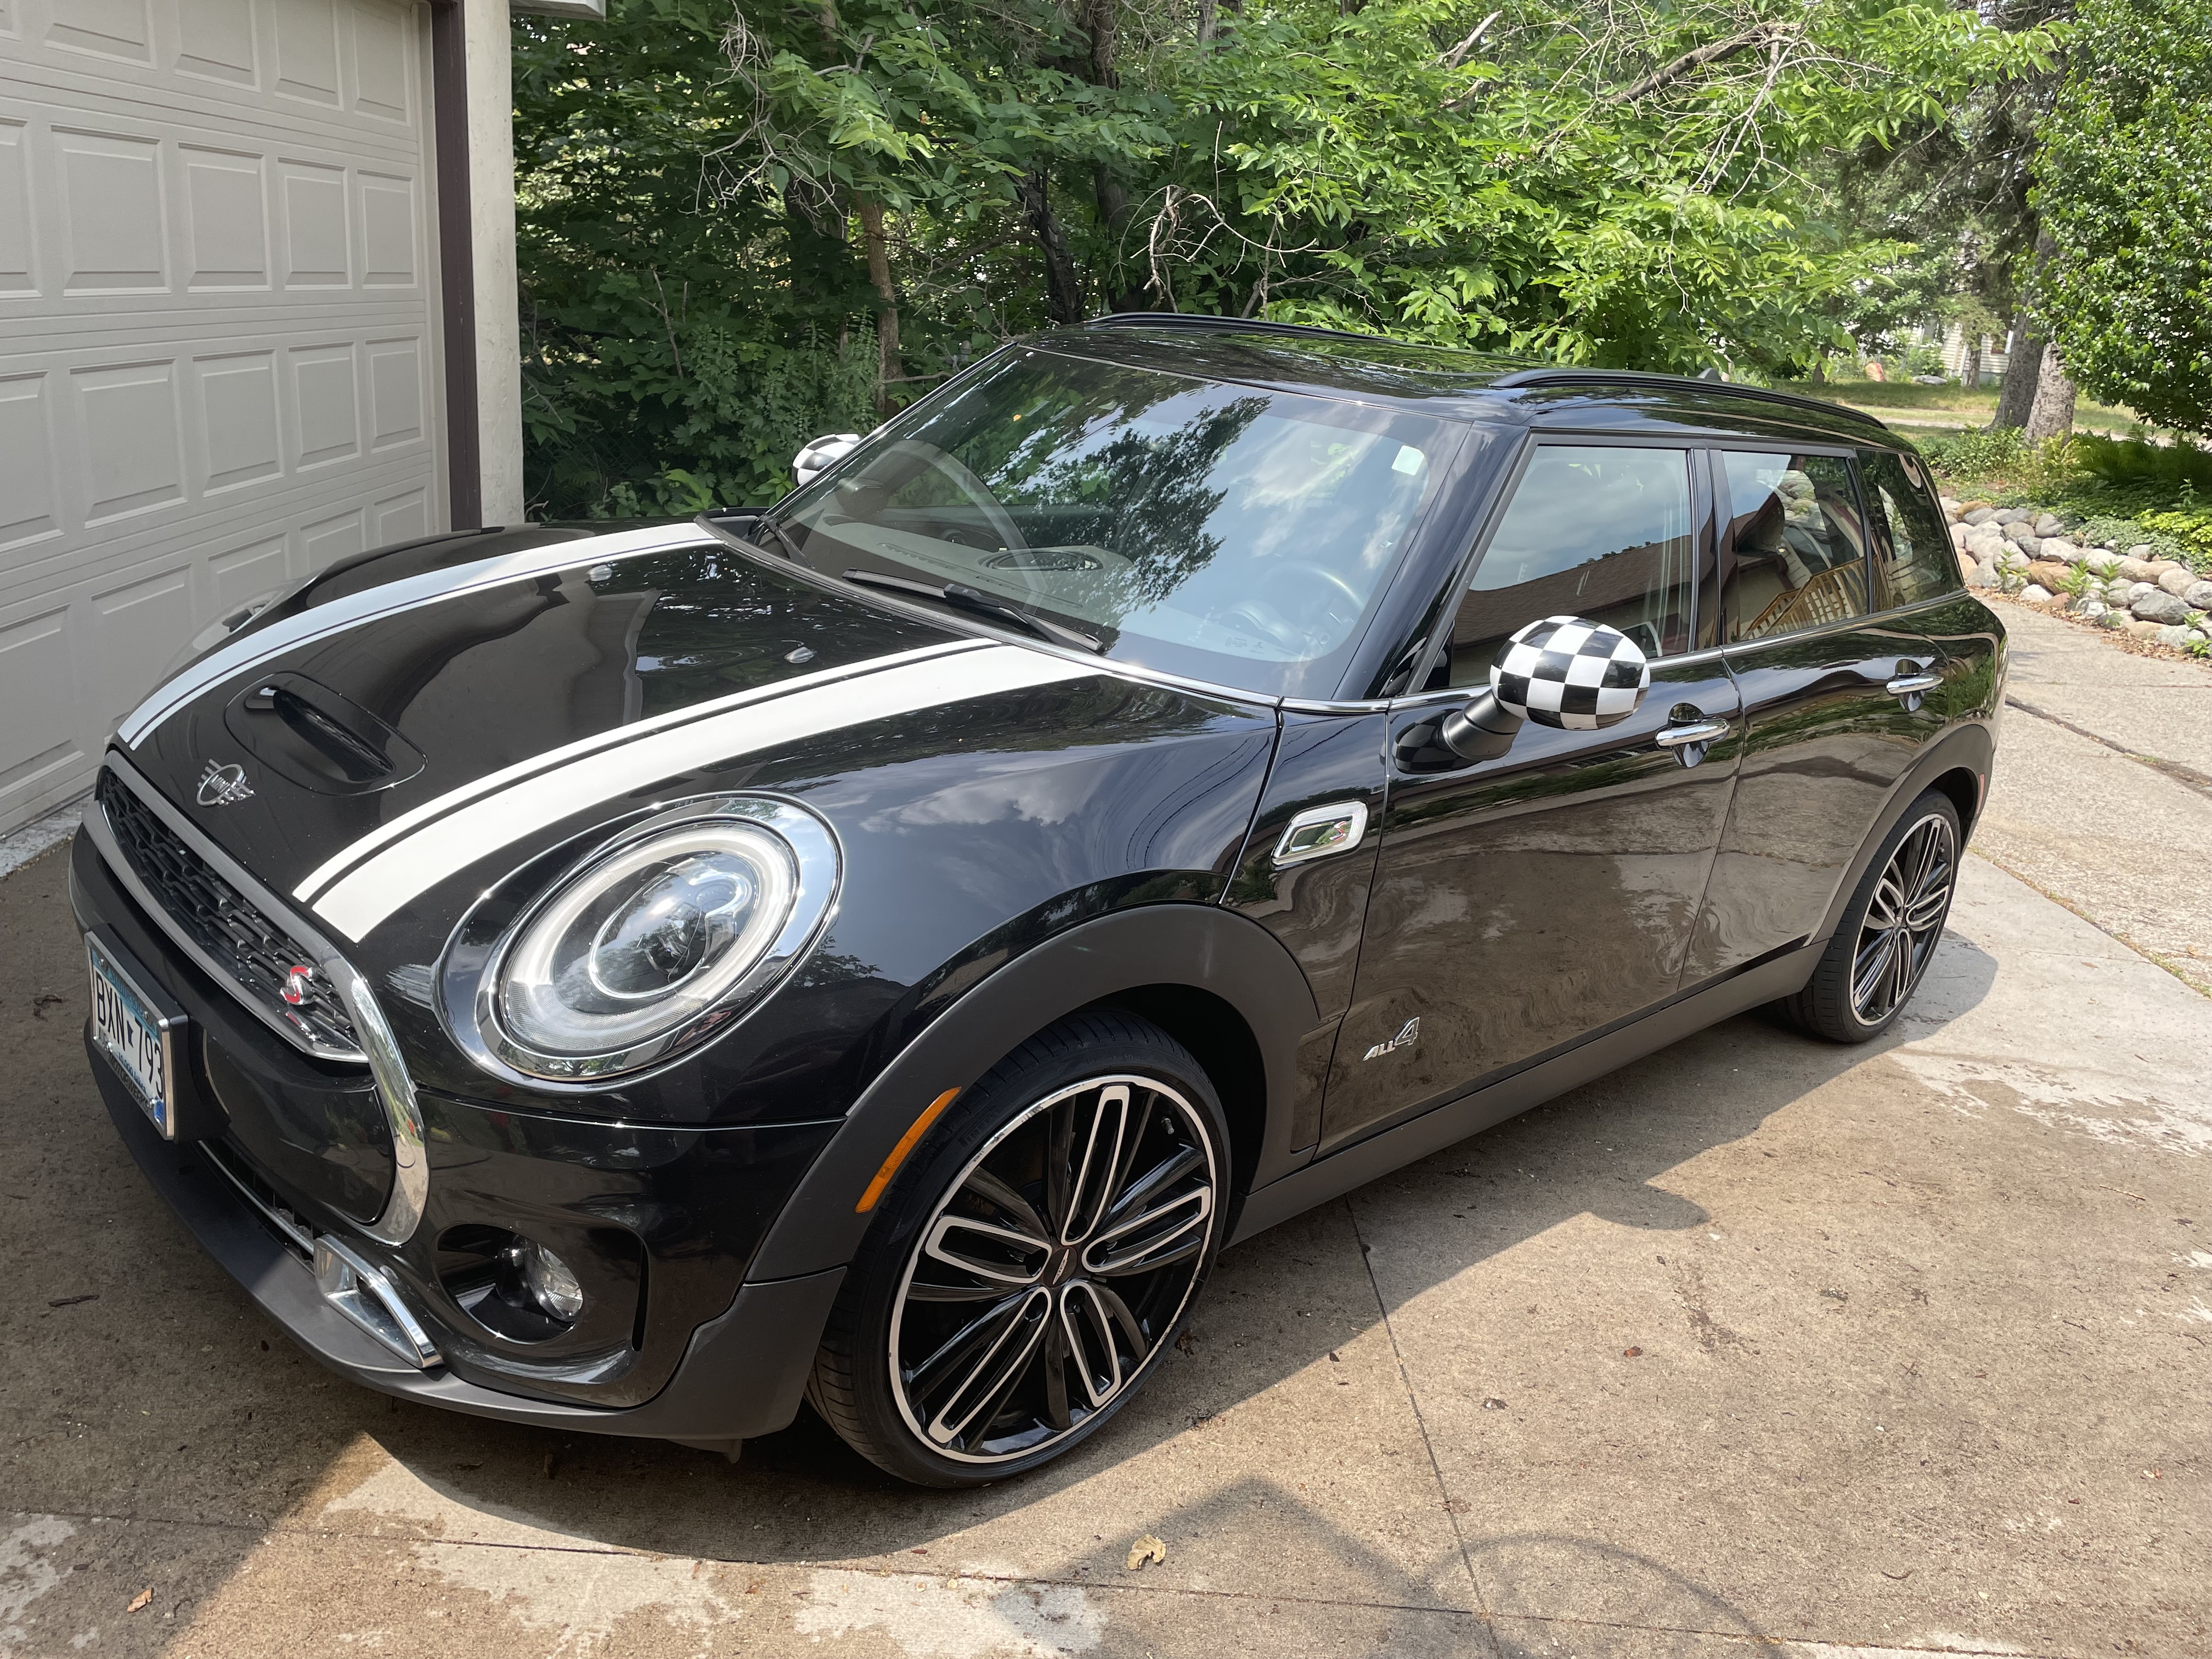 Used MINI Cooper Clubman for Sale Right Now - Autotrader